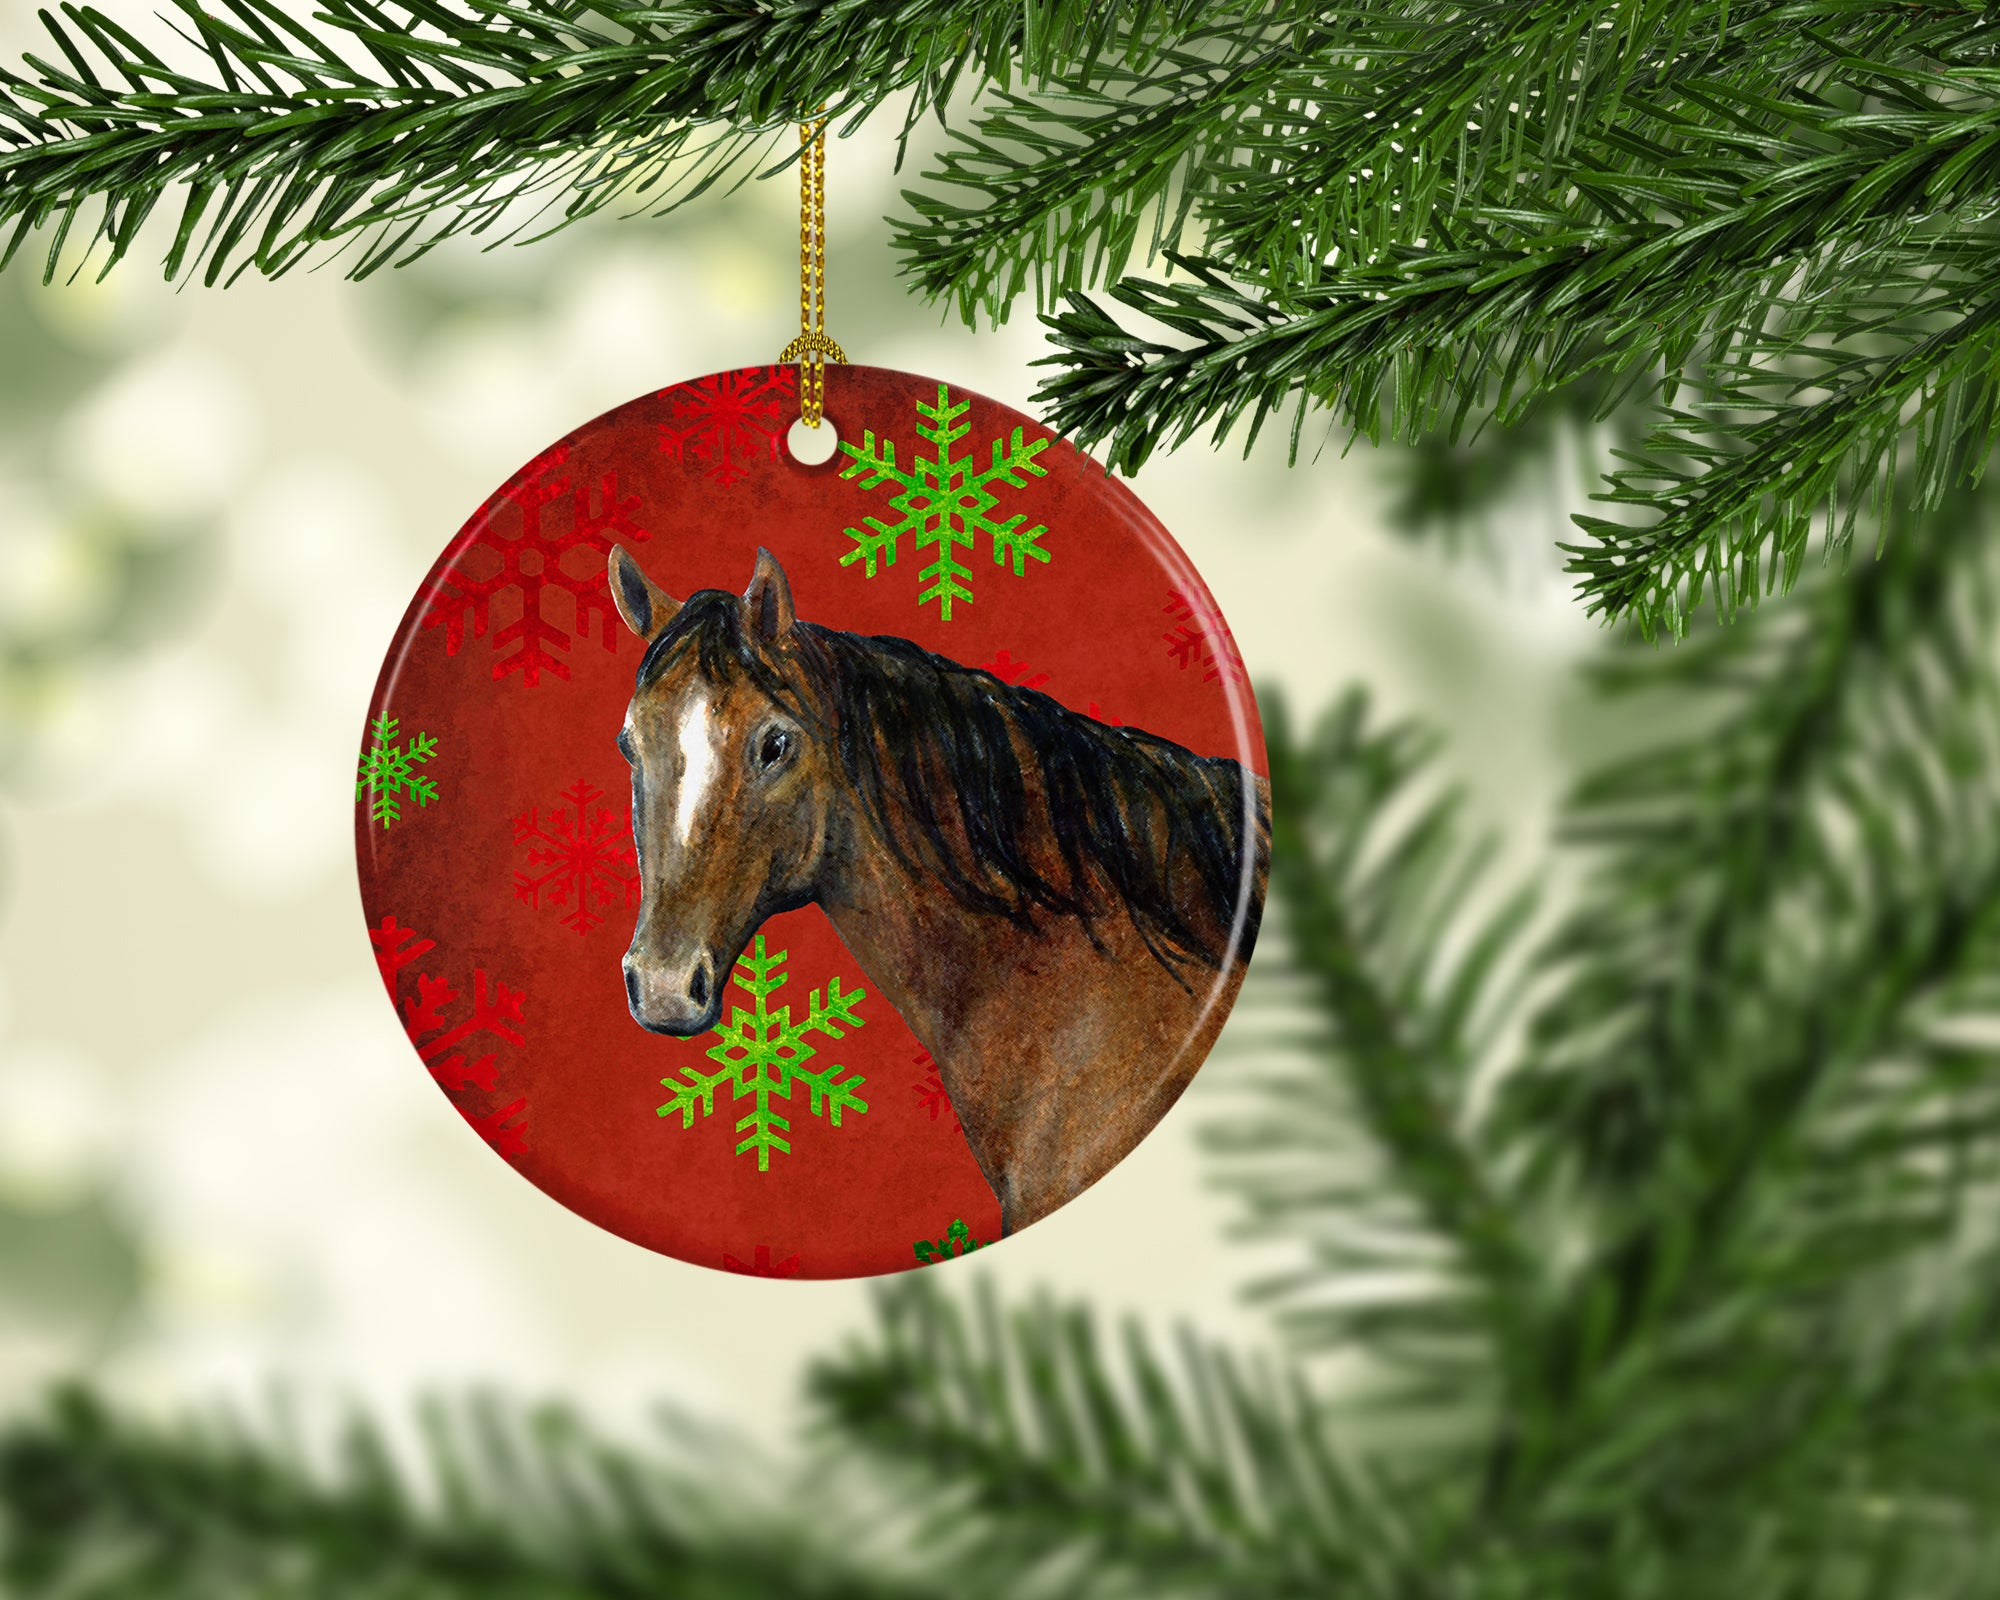 Horse Red Snowflakes Holiday Christmas Ceramic Ornament SB3121CO1 - the-store.com